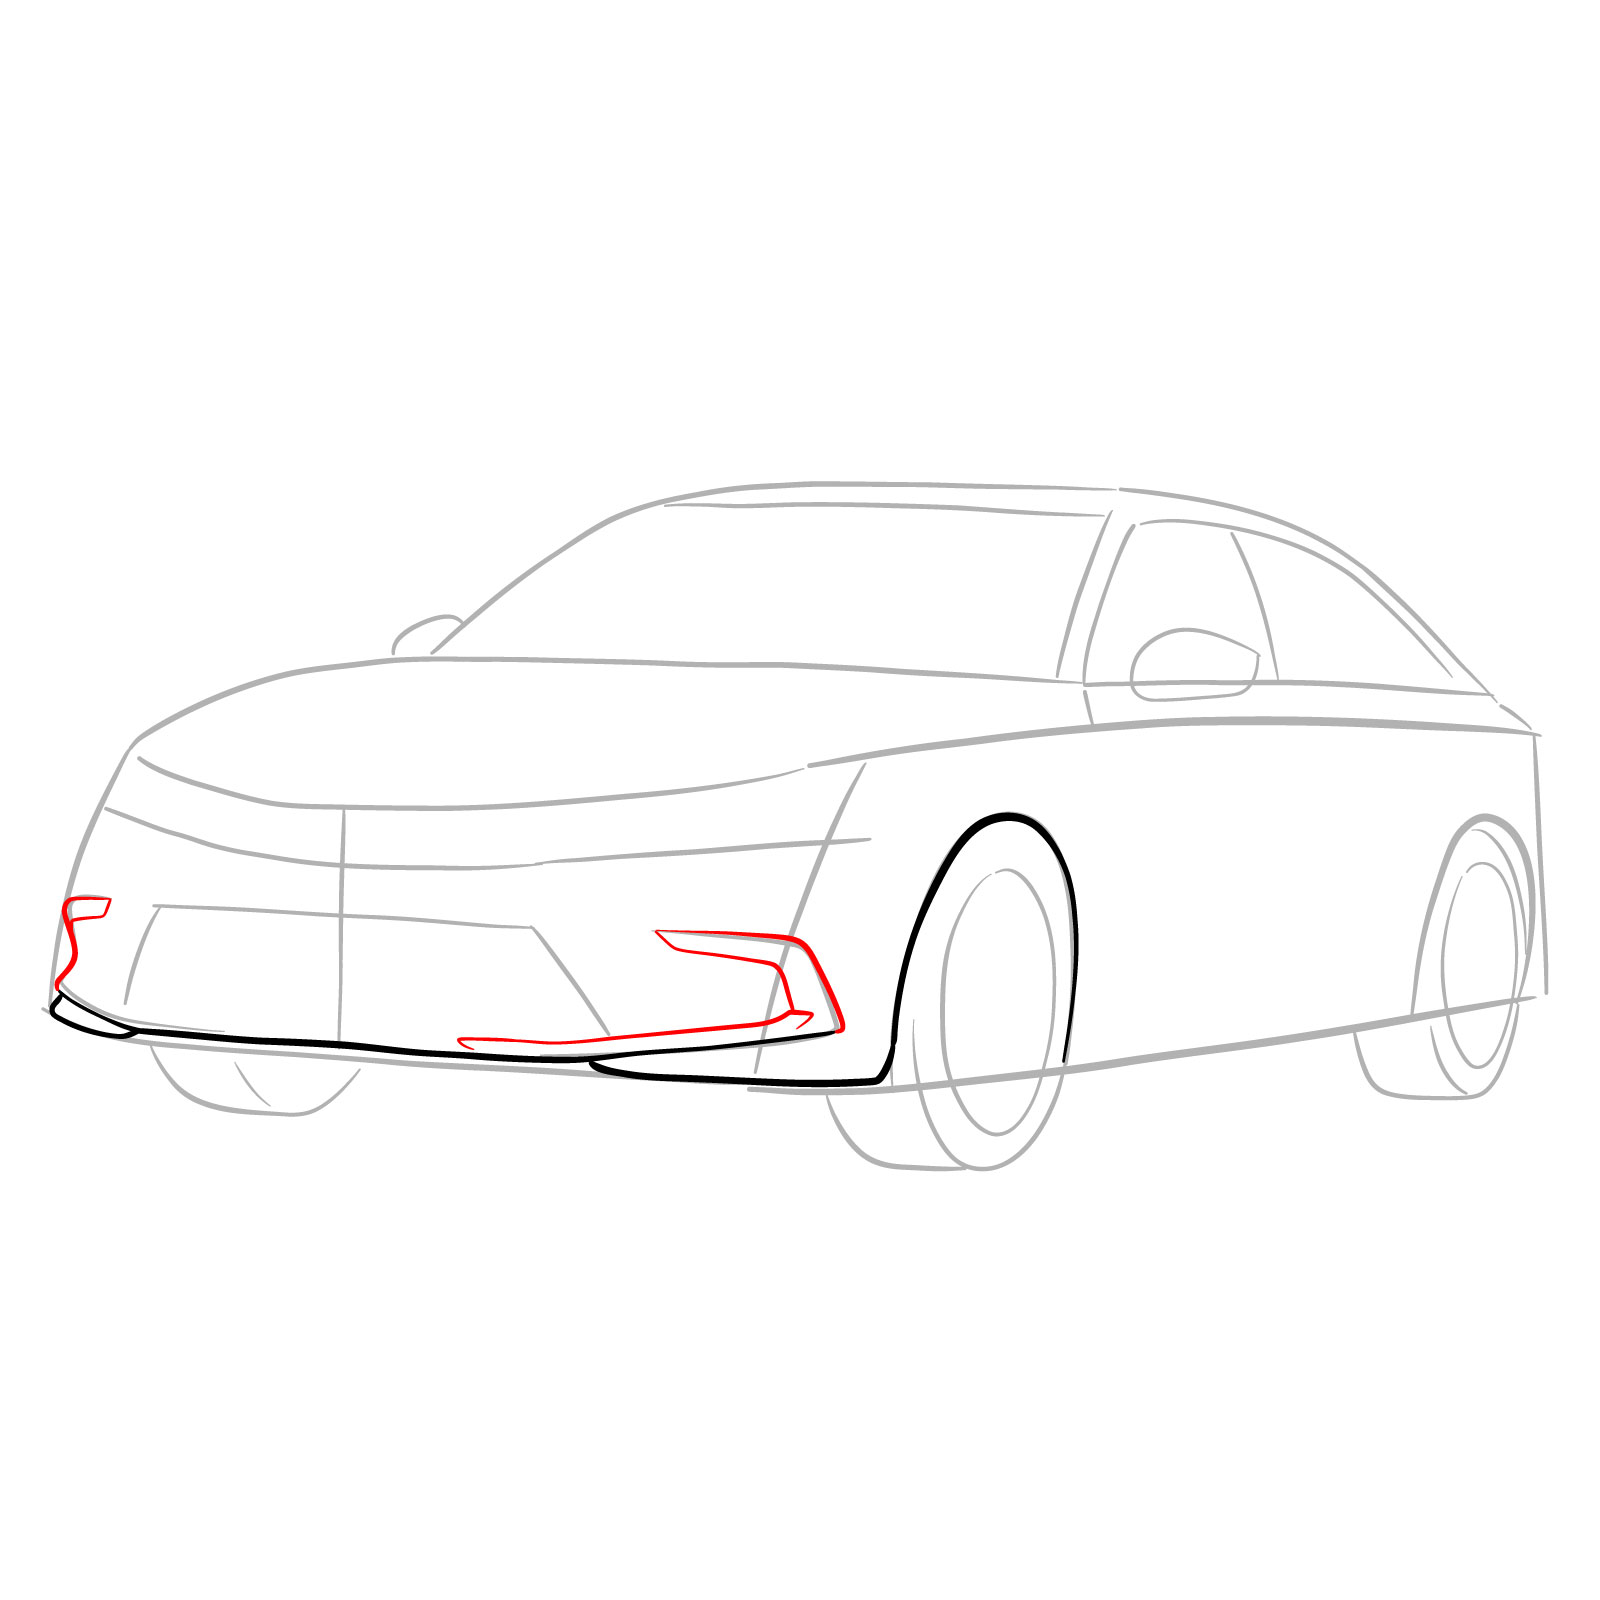 How to draw a 2022 Honda Civic - step 06